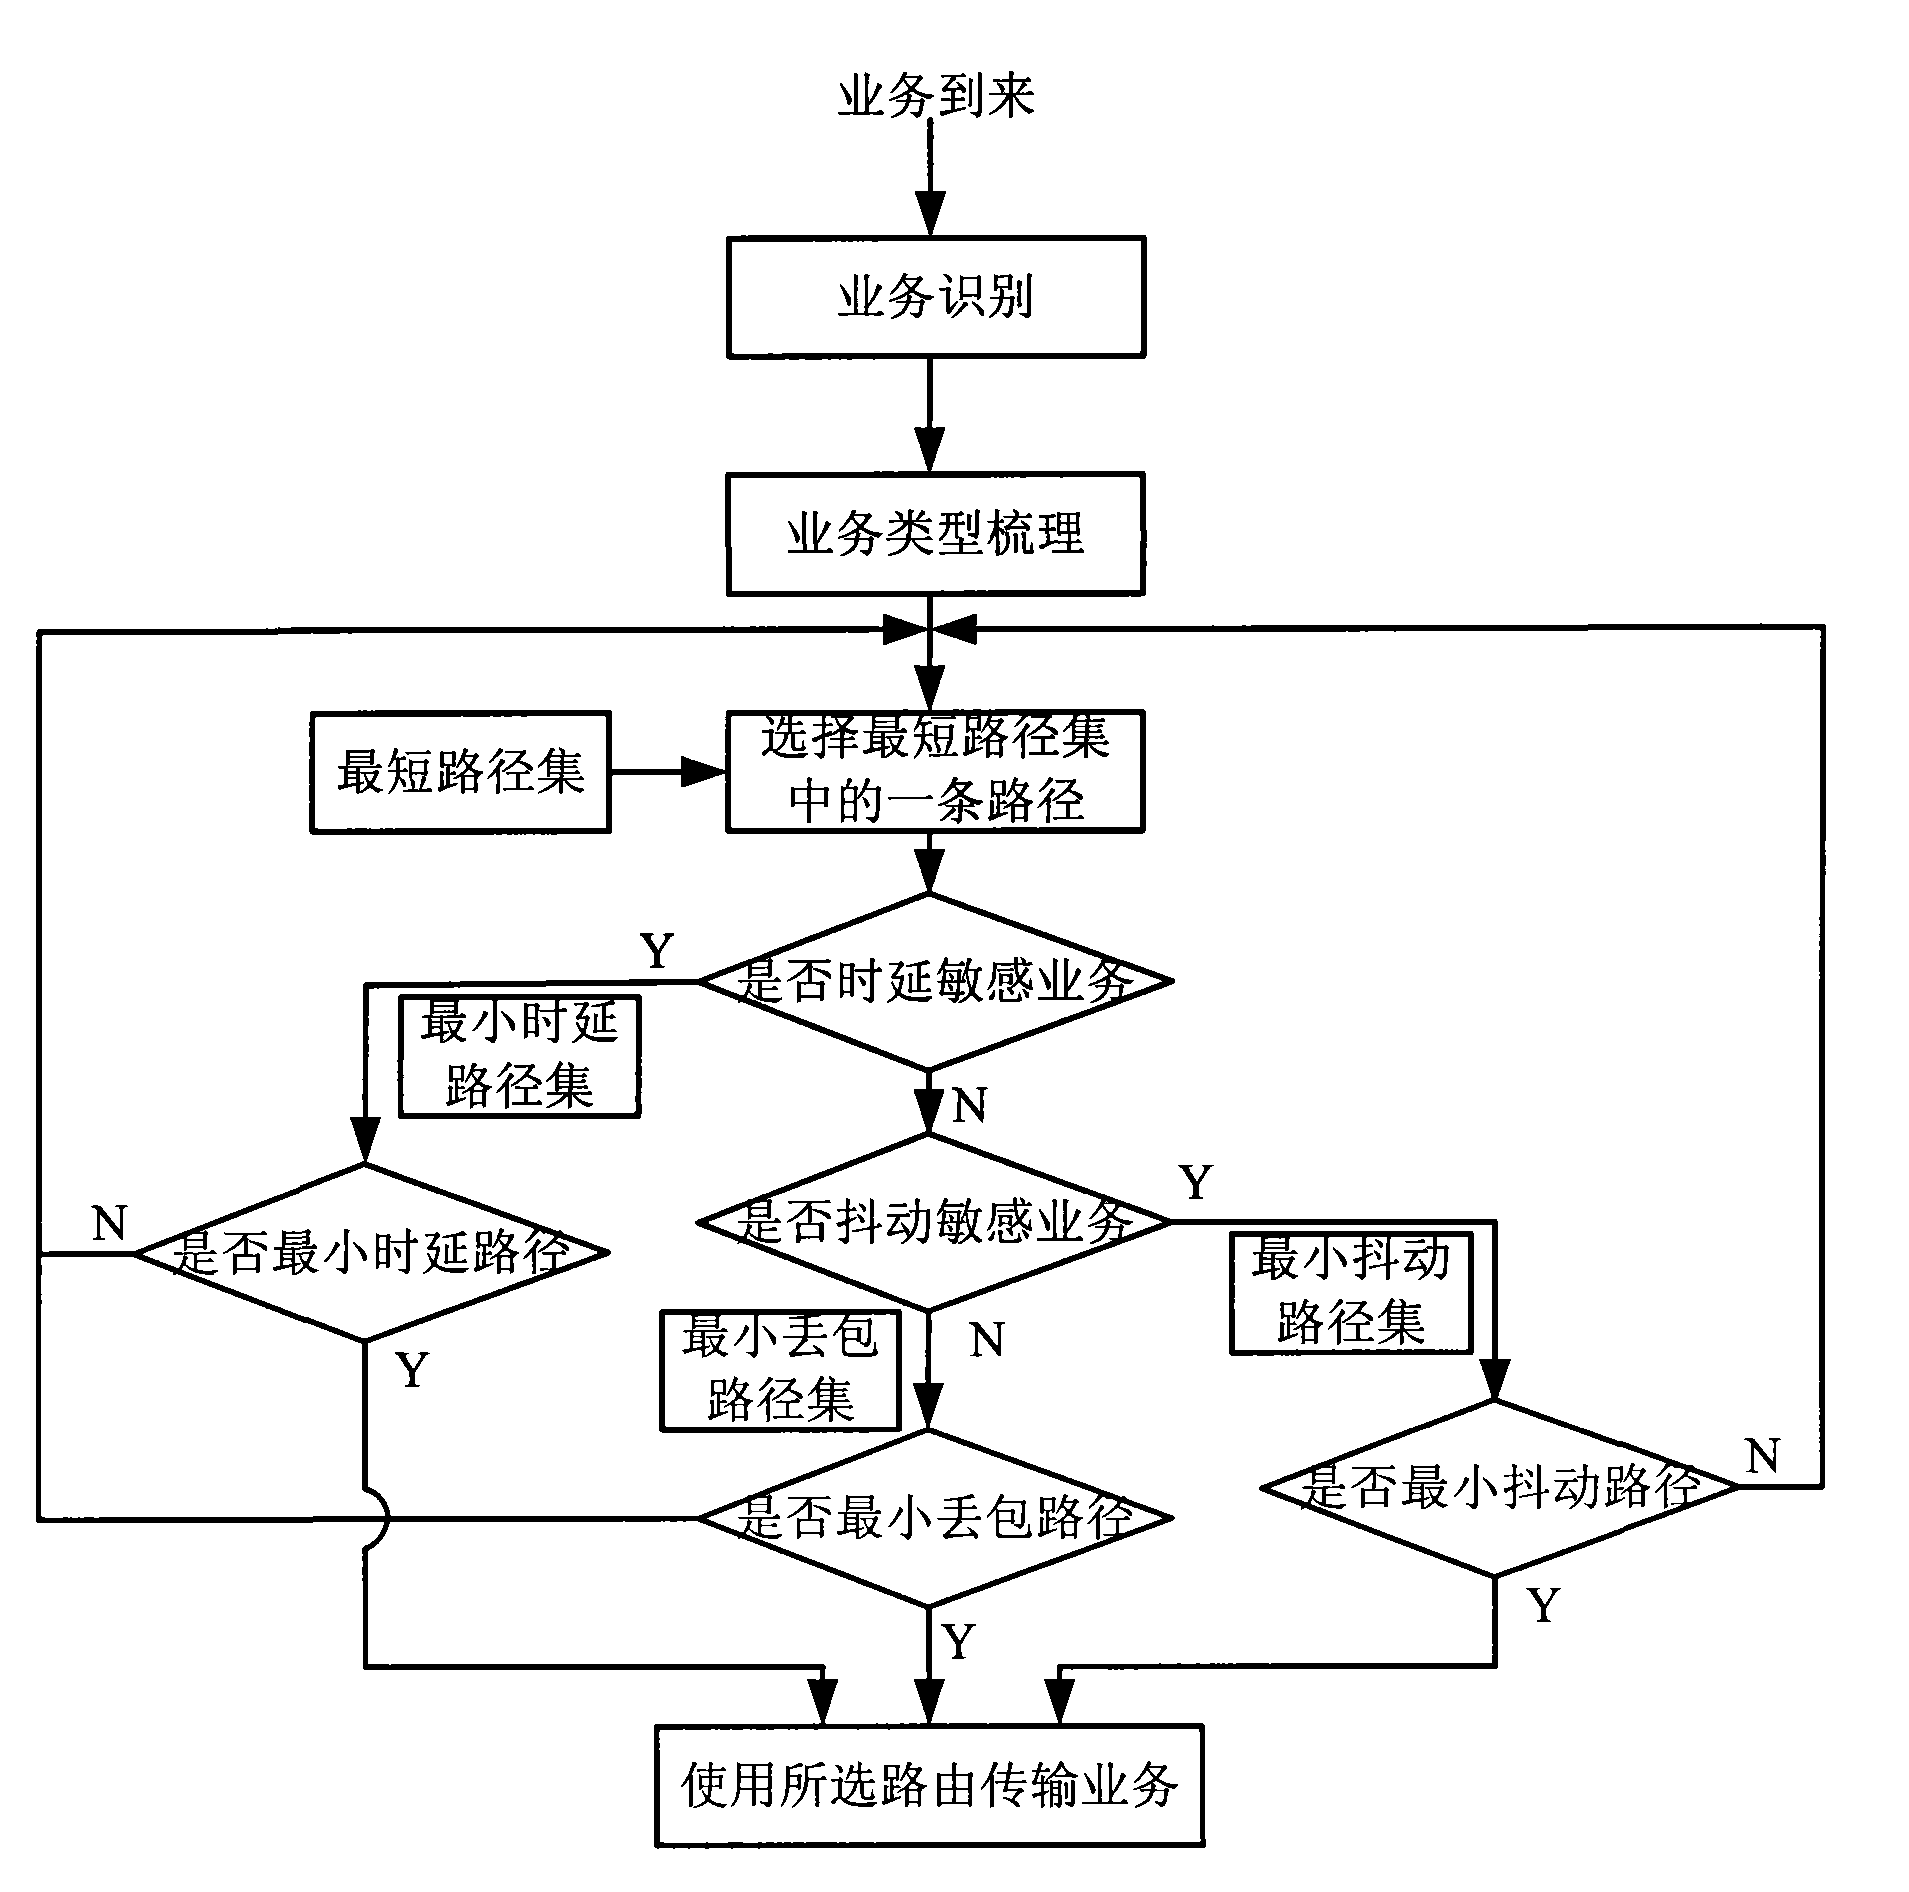 Route selection method for intelligent self-perception optical network base on network status